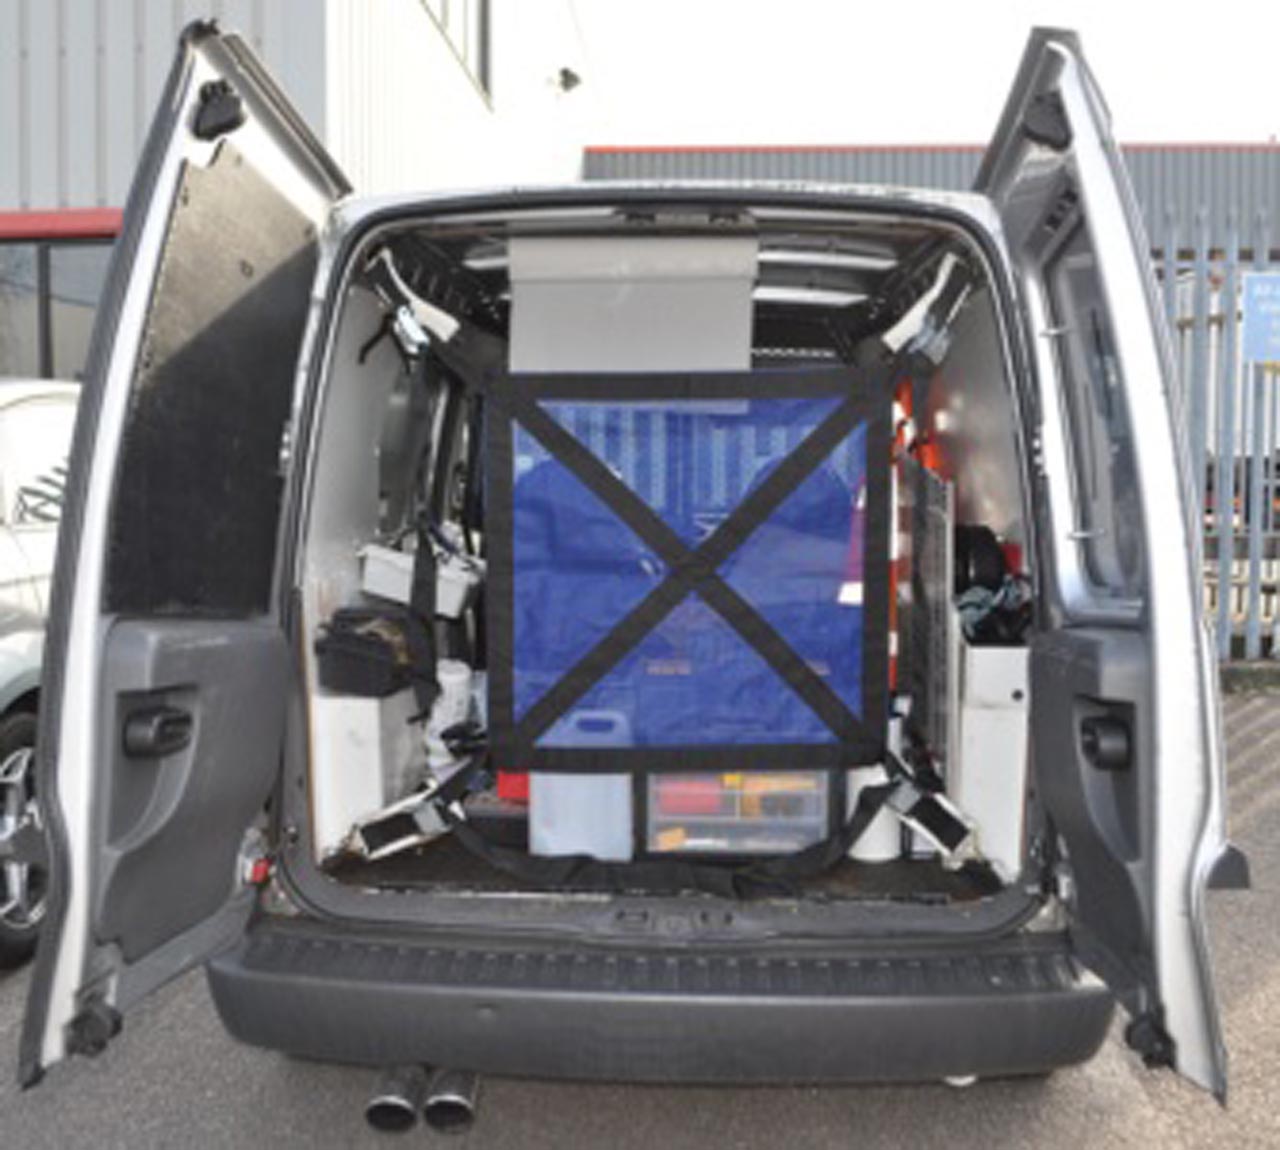 Load restraint net with ratchets fitted in the back of a vehicle.